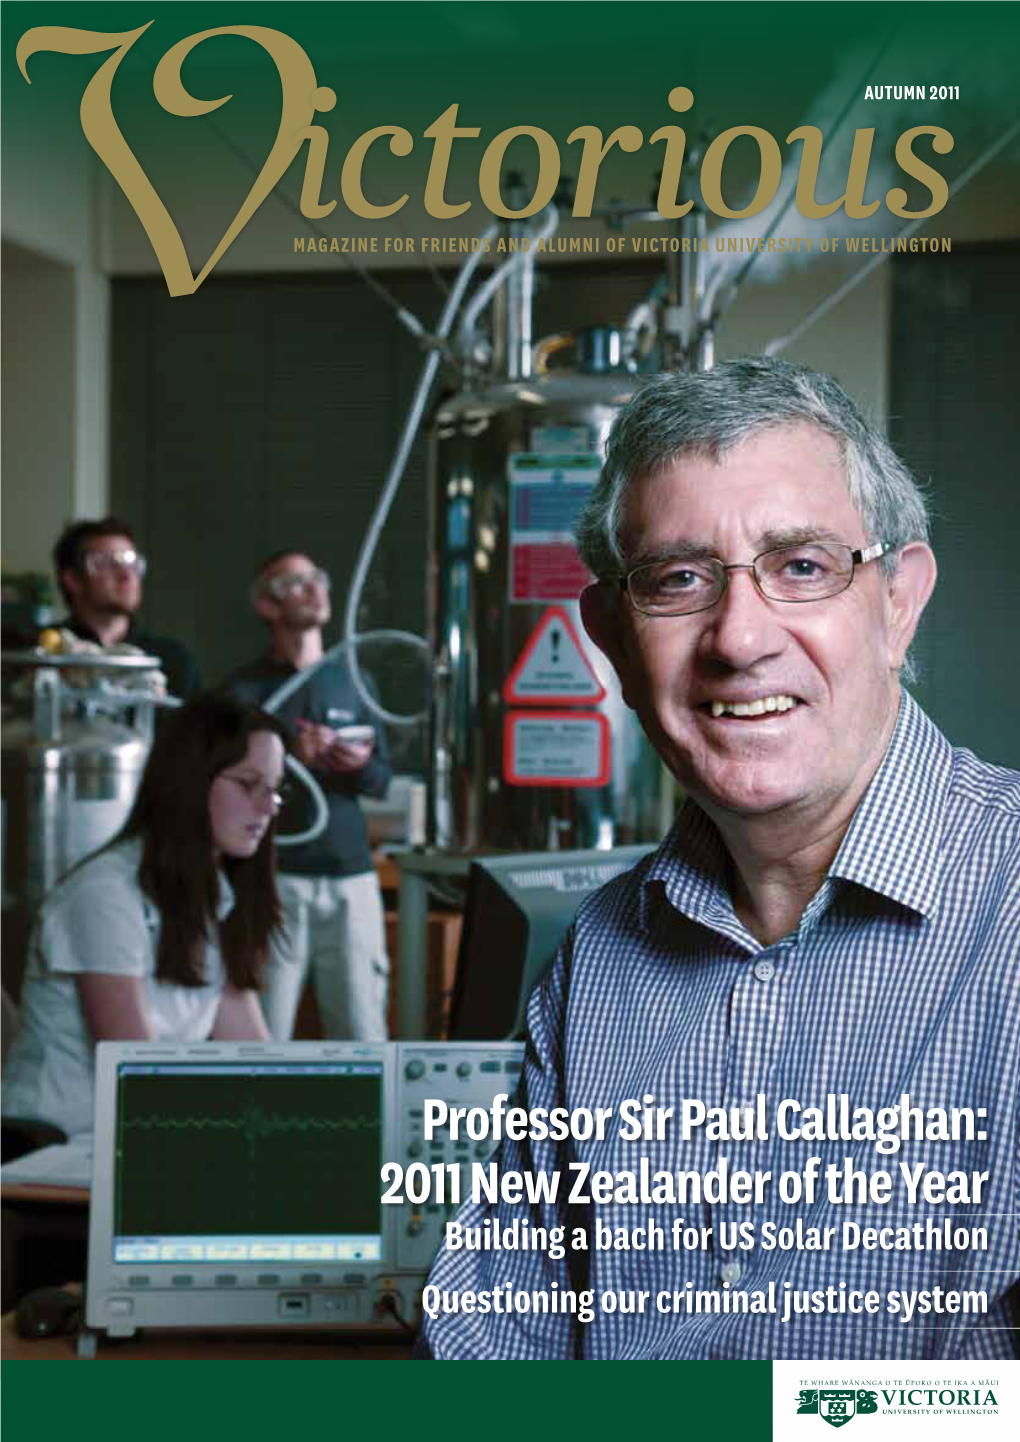 Professor Sir Paul Callaghan: 2011 New Zealander of the Year Building a Bach for US Solar Decathlon Questioning Our Criminal Justice System V